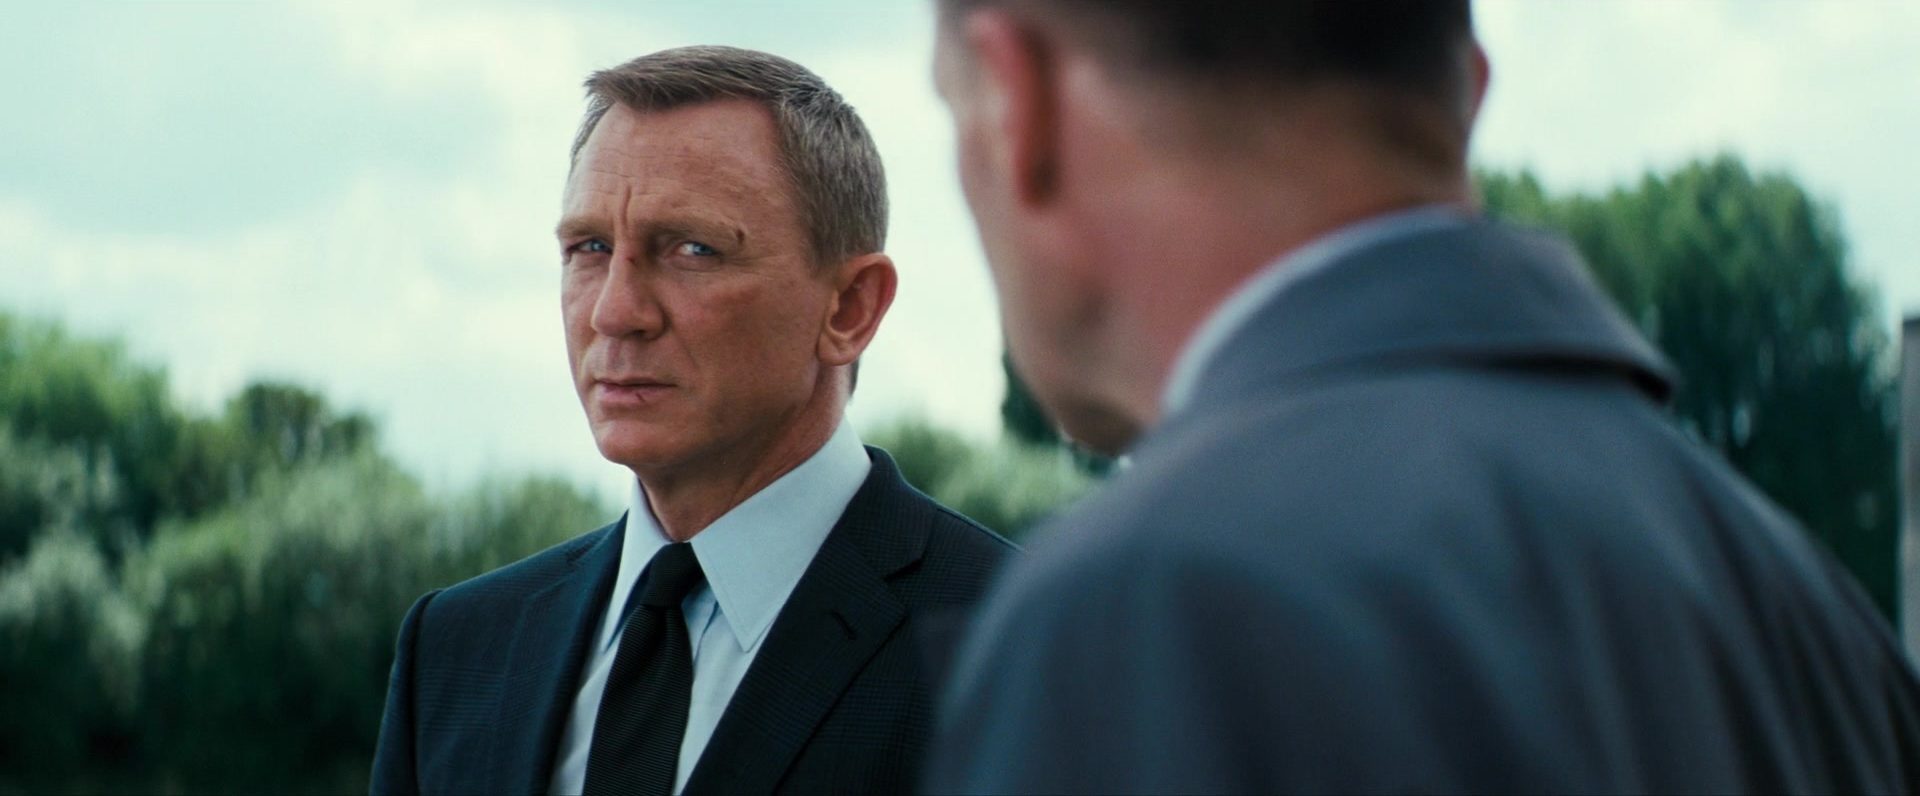 ‘James Bond’ Franchise Producers Say Future Films Will Further Explore ...